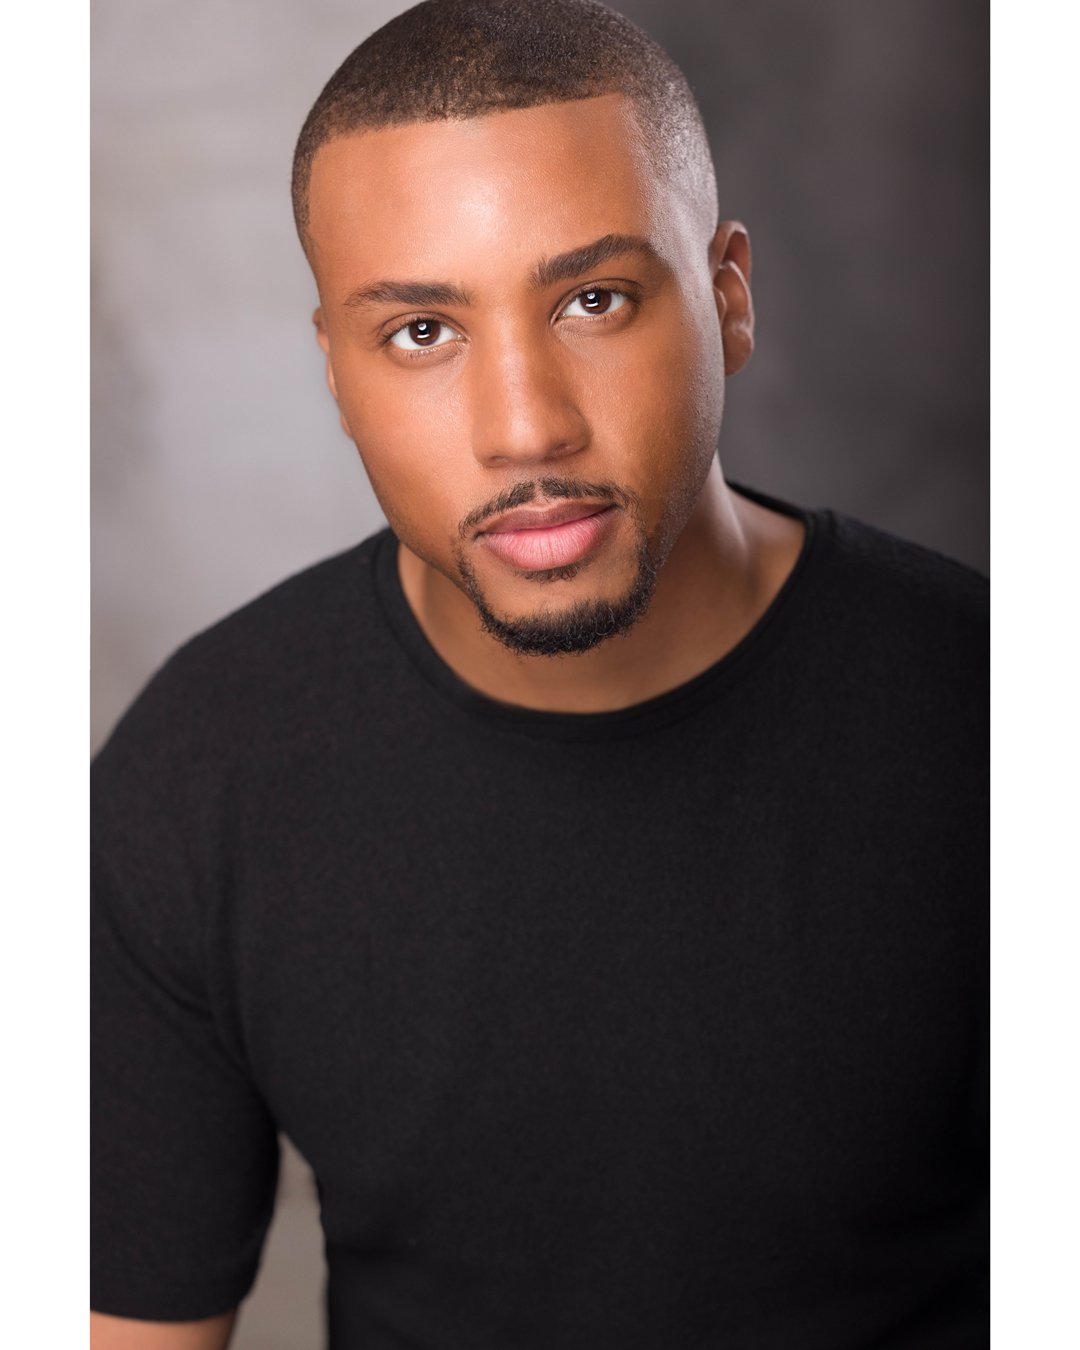 Let Me Help You Get In The Room! (or wherever you tape your auditions!)

Headshots for Actors &amp; Creatives
Los Angeles, California

🎭: @gregmathisjr 
💈Grooming: @sam.cota 

BOOK YOUR SHOOT TODAY

www.photosbyjamaal.com

#headshots #headshot #aud